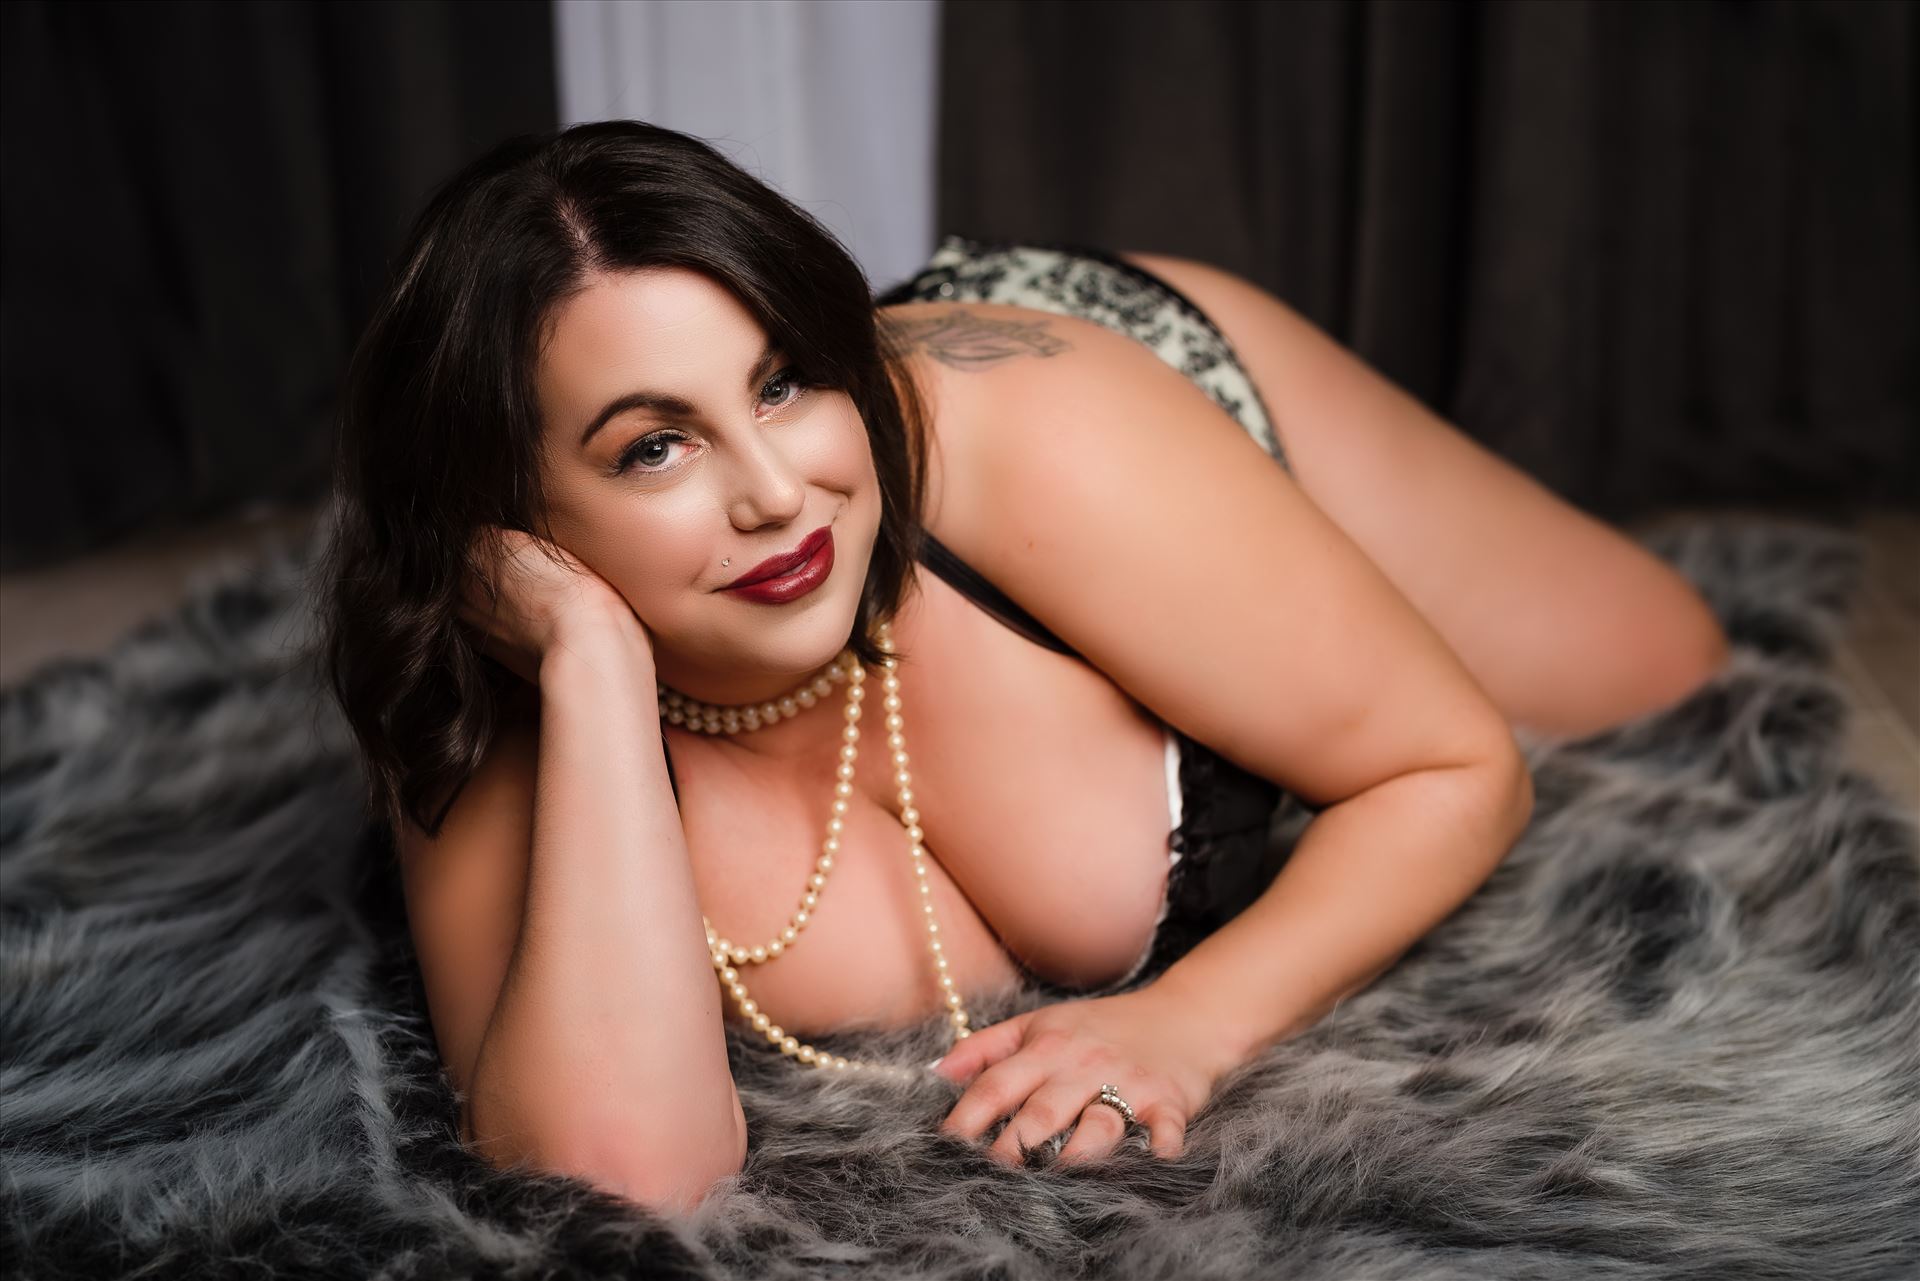 port nw-6084.JPGBeachfront Boudoir by Mirror's Edge Photography is a Boutique Luxury Boudoir Photography Studio located just blocks from the beach in Oceano, California. My mission is to show as many women as possible how beautiful they truly are!